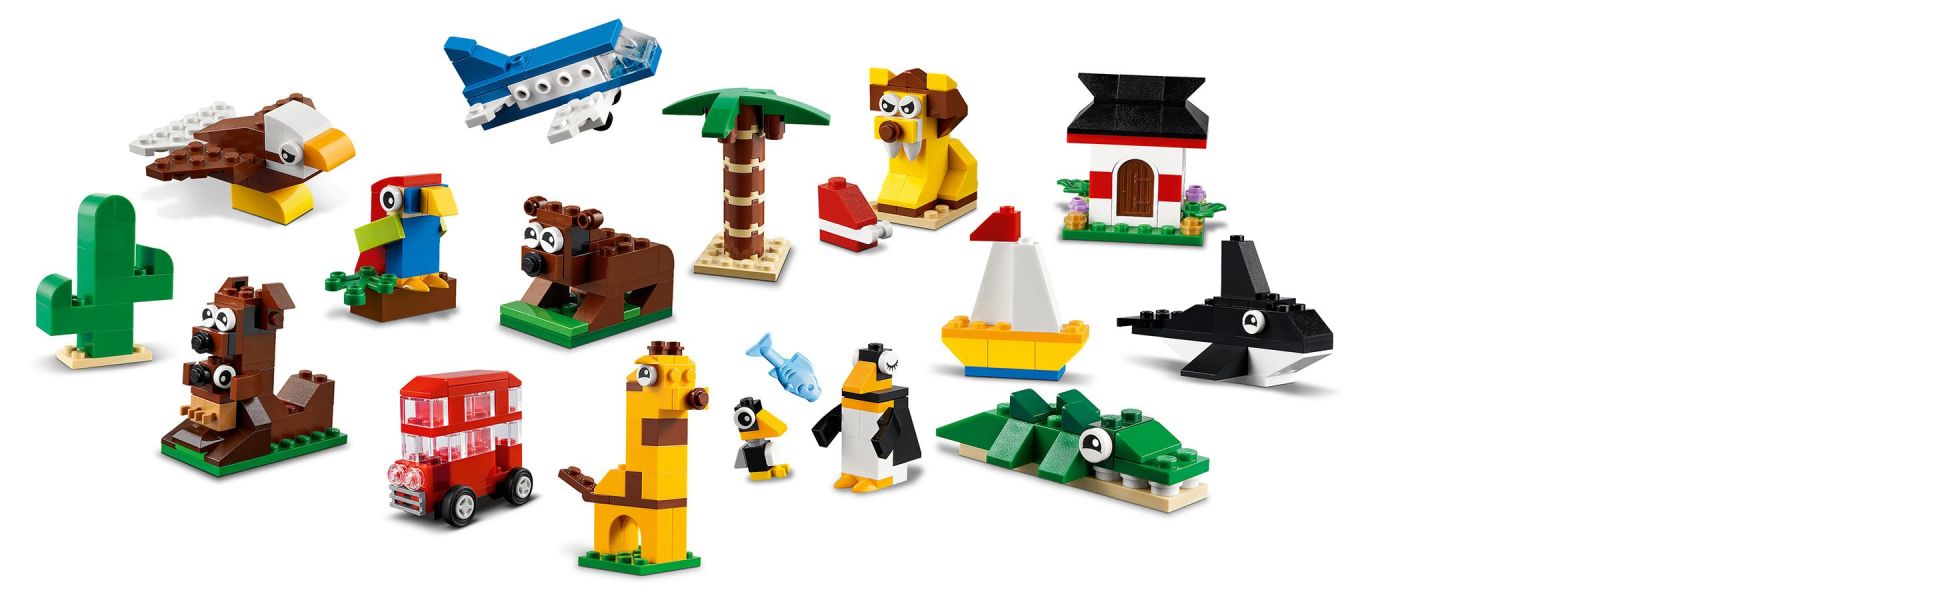 LEGO Classic Around the World 11015 Building Toy for Creative Play; Iconic  Animal Toys (950 Pieces) 